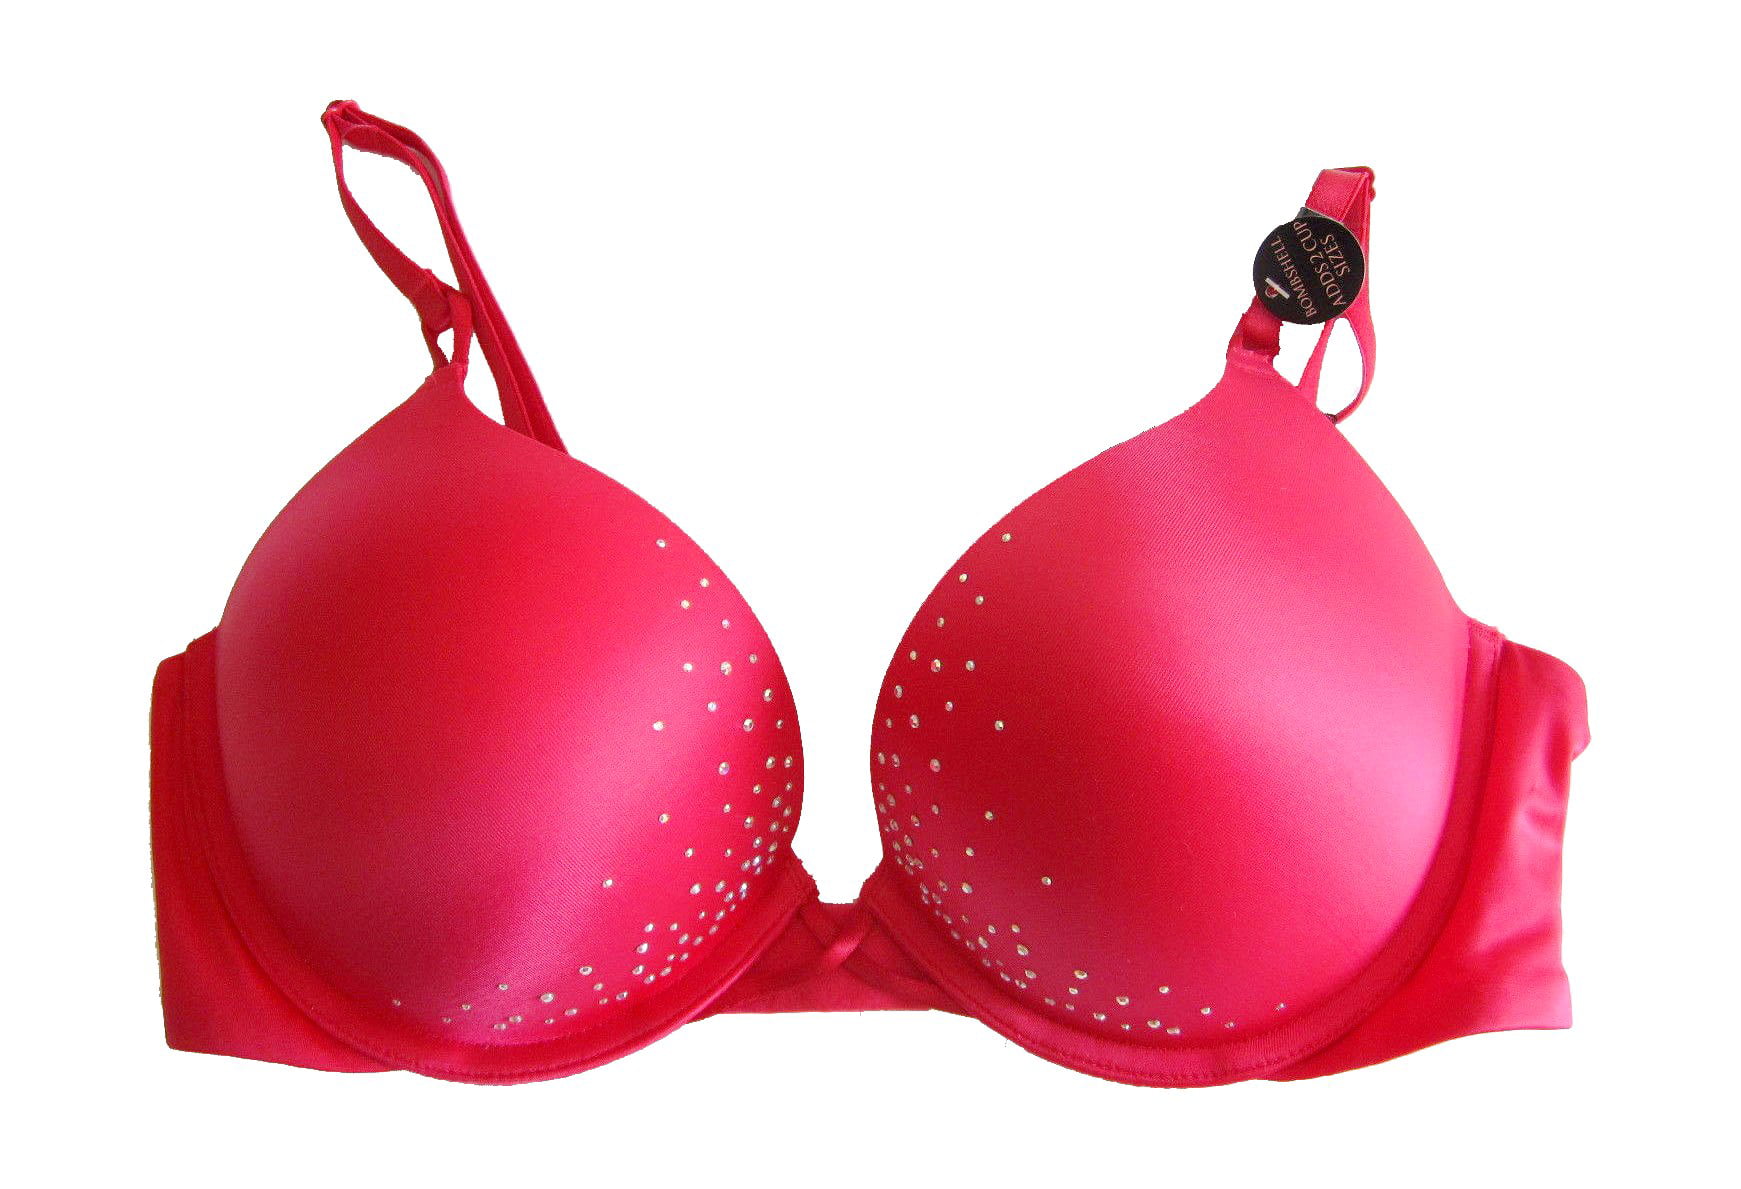 Victorias Secret Bombshell Padded Push Up Adds 2 Cup Ireland